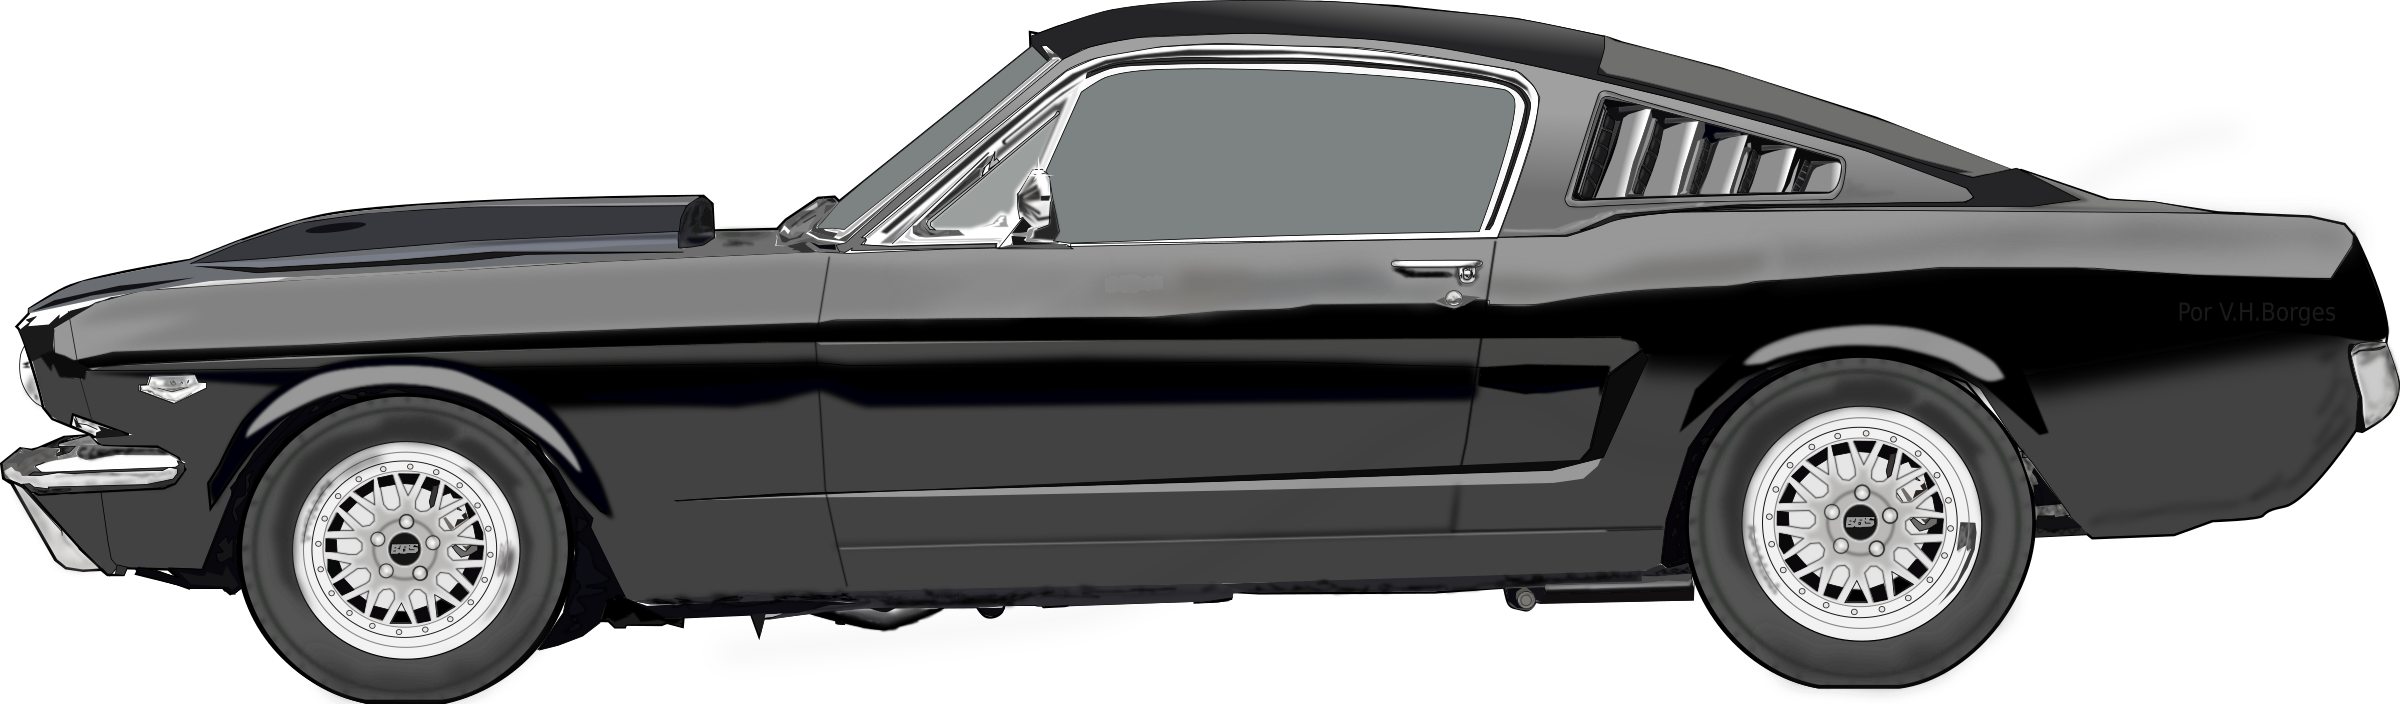 Ford Mustang Background PNG Clip Art Image